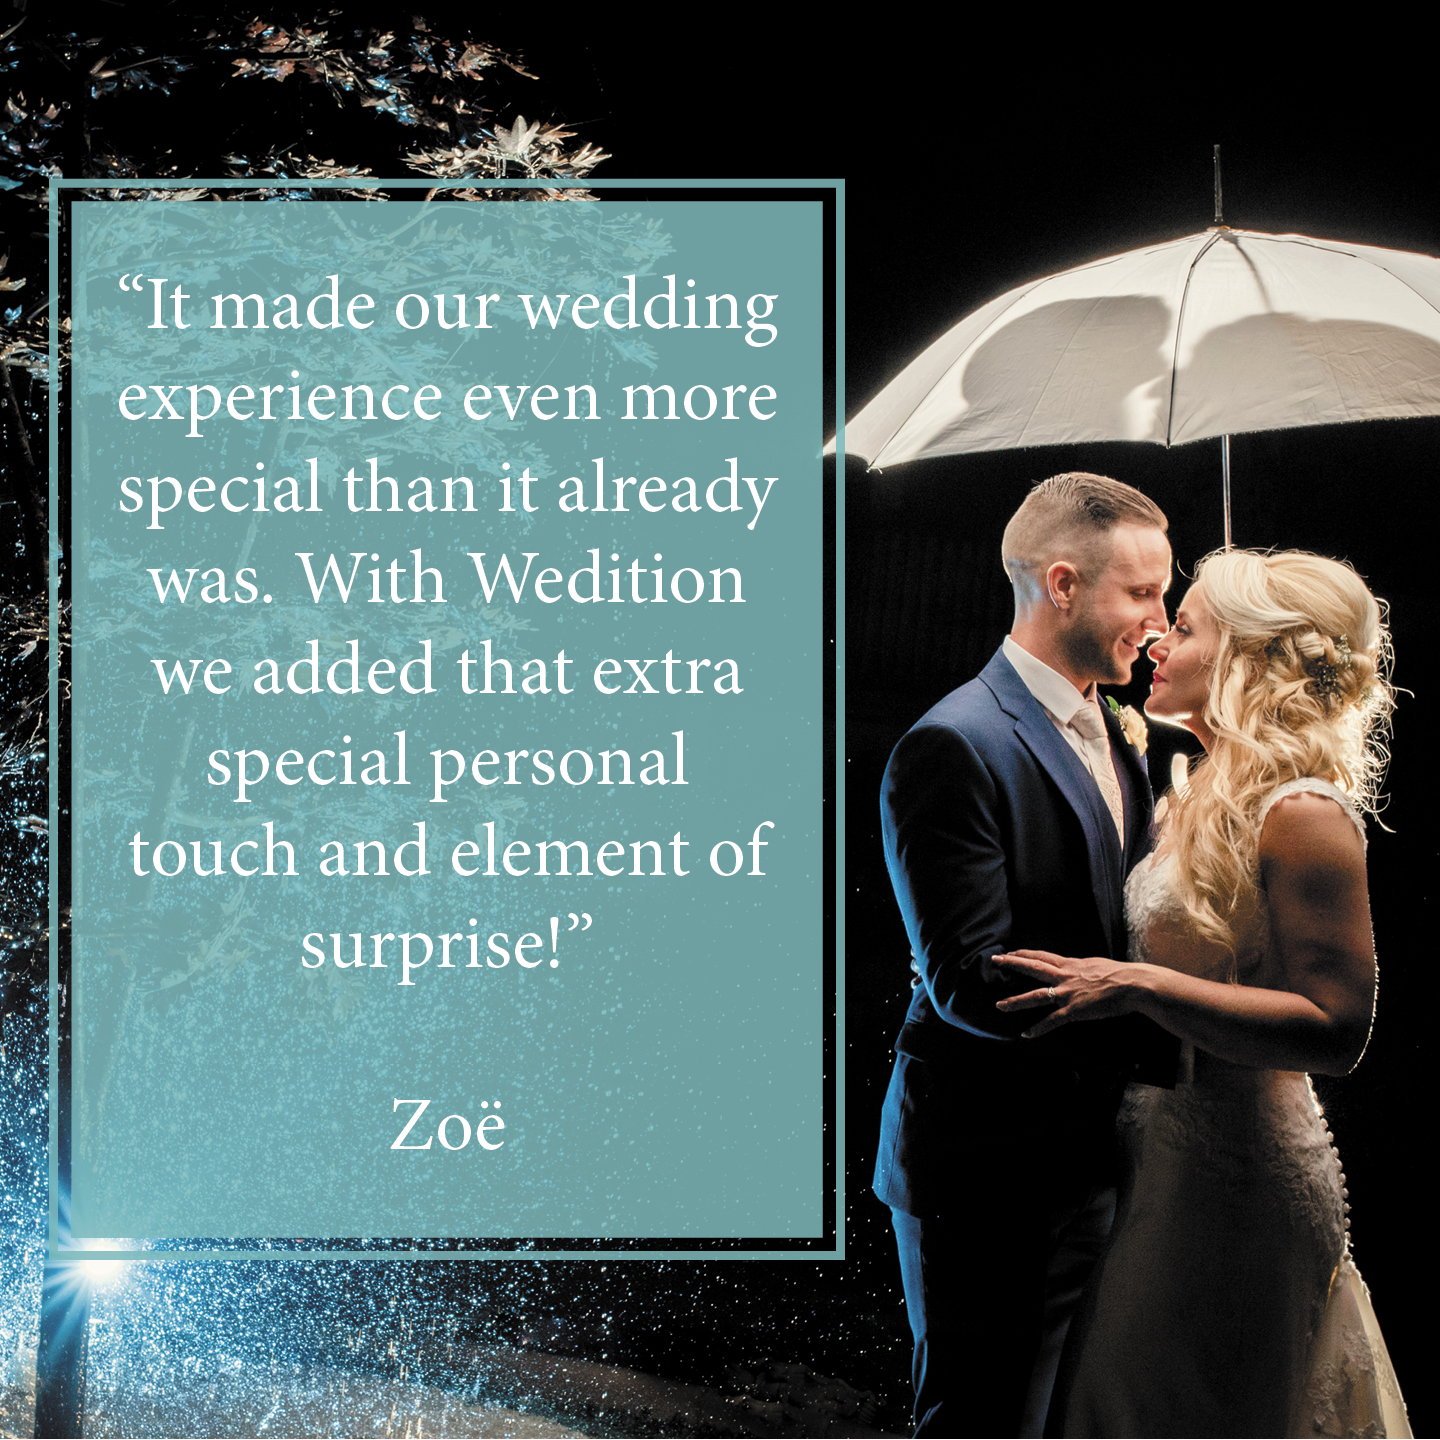 Make your wedding more special